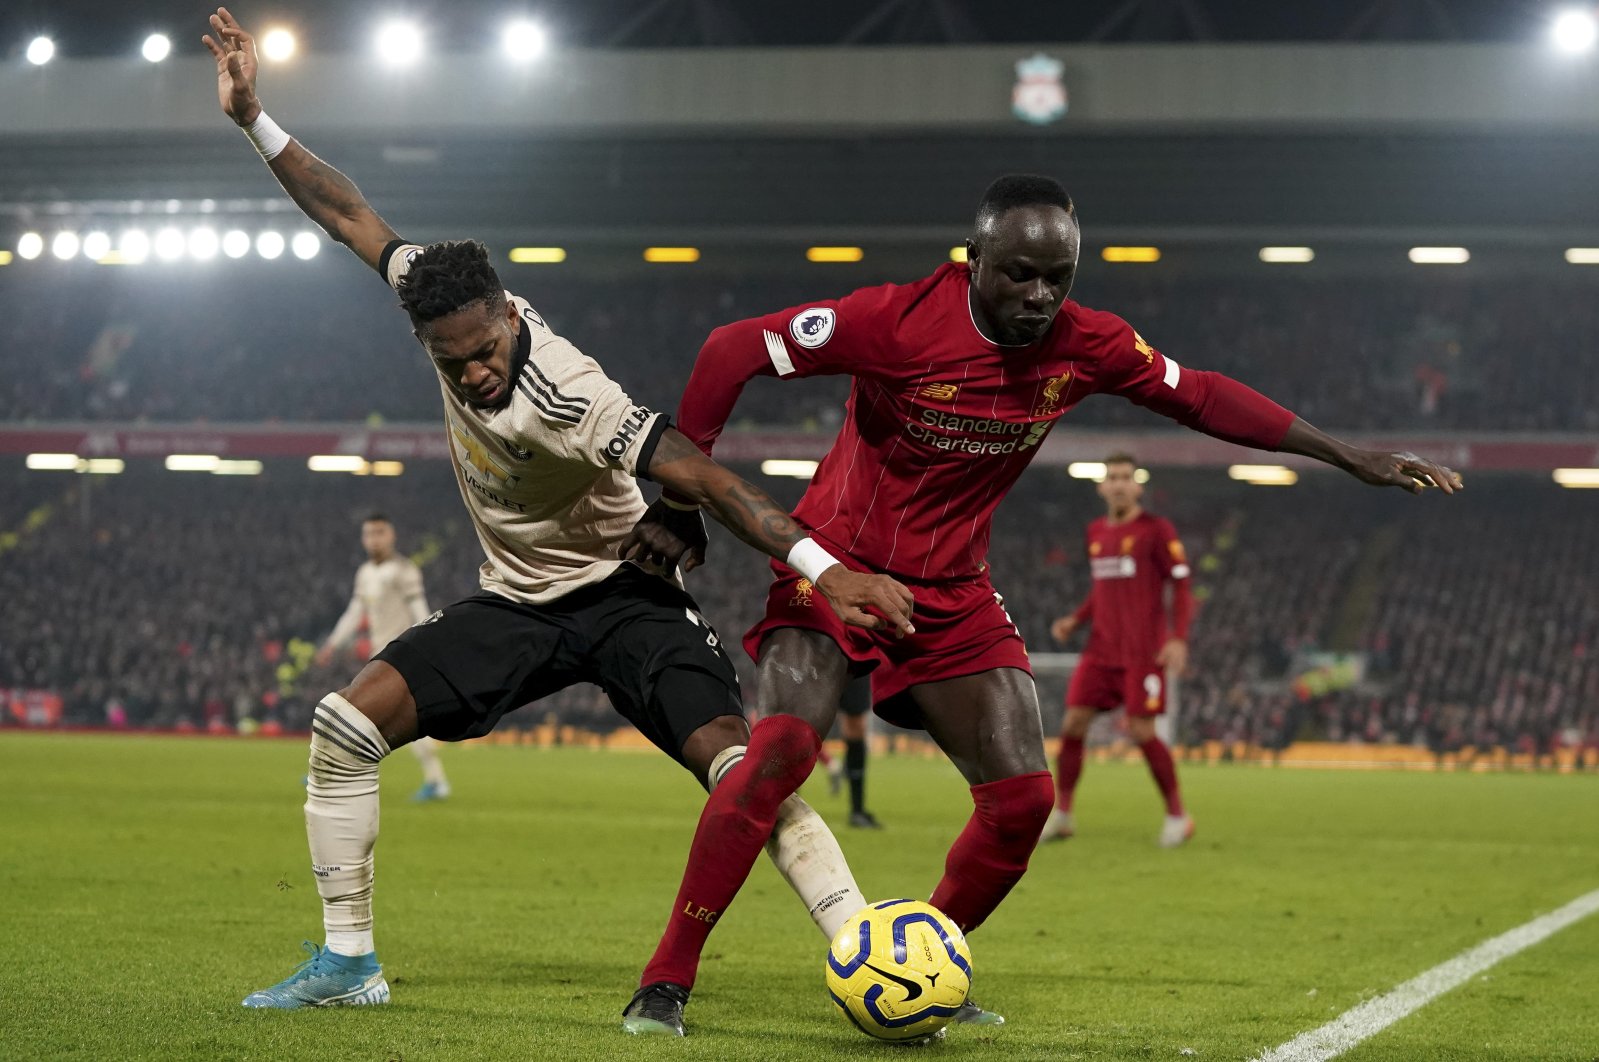 Liverpool's Sadio Mane (R) and Manchester United's Fred vie for the ball during a Premier League match at the Anfield stadium in Liverpool, Britain, Jan. 19, 2020. (AP Photo)